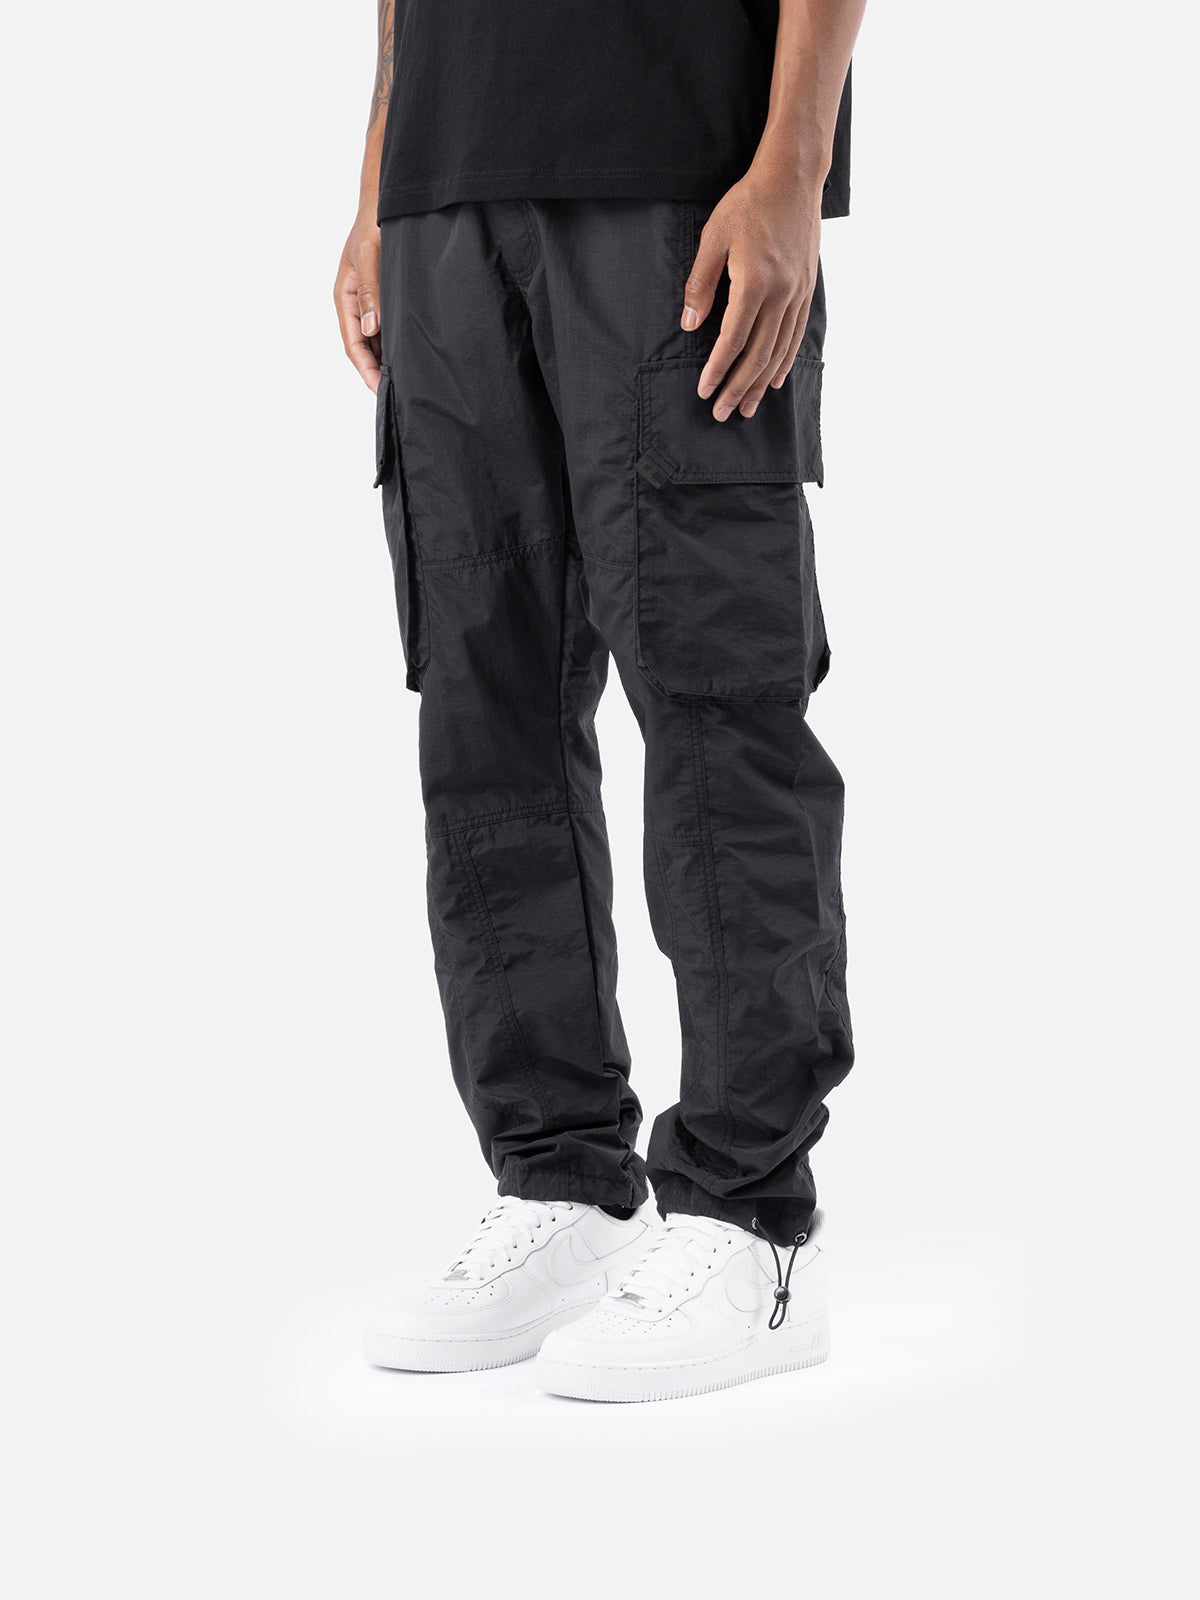 Y2K Techwear Mens Black Cargo Pants Streetwear Fashionable Hip Hop High  Street Punk Streetwear Baggy Pants For Men Casual Joggers And Clothing  230211 From Kong01, $18.02 | DHgate.Com